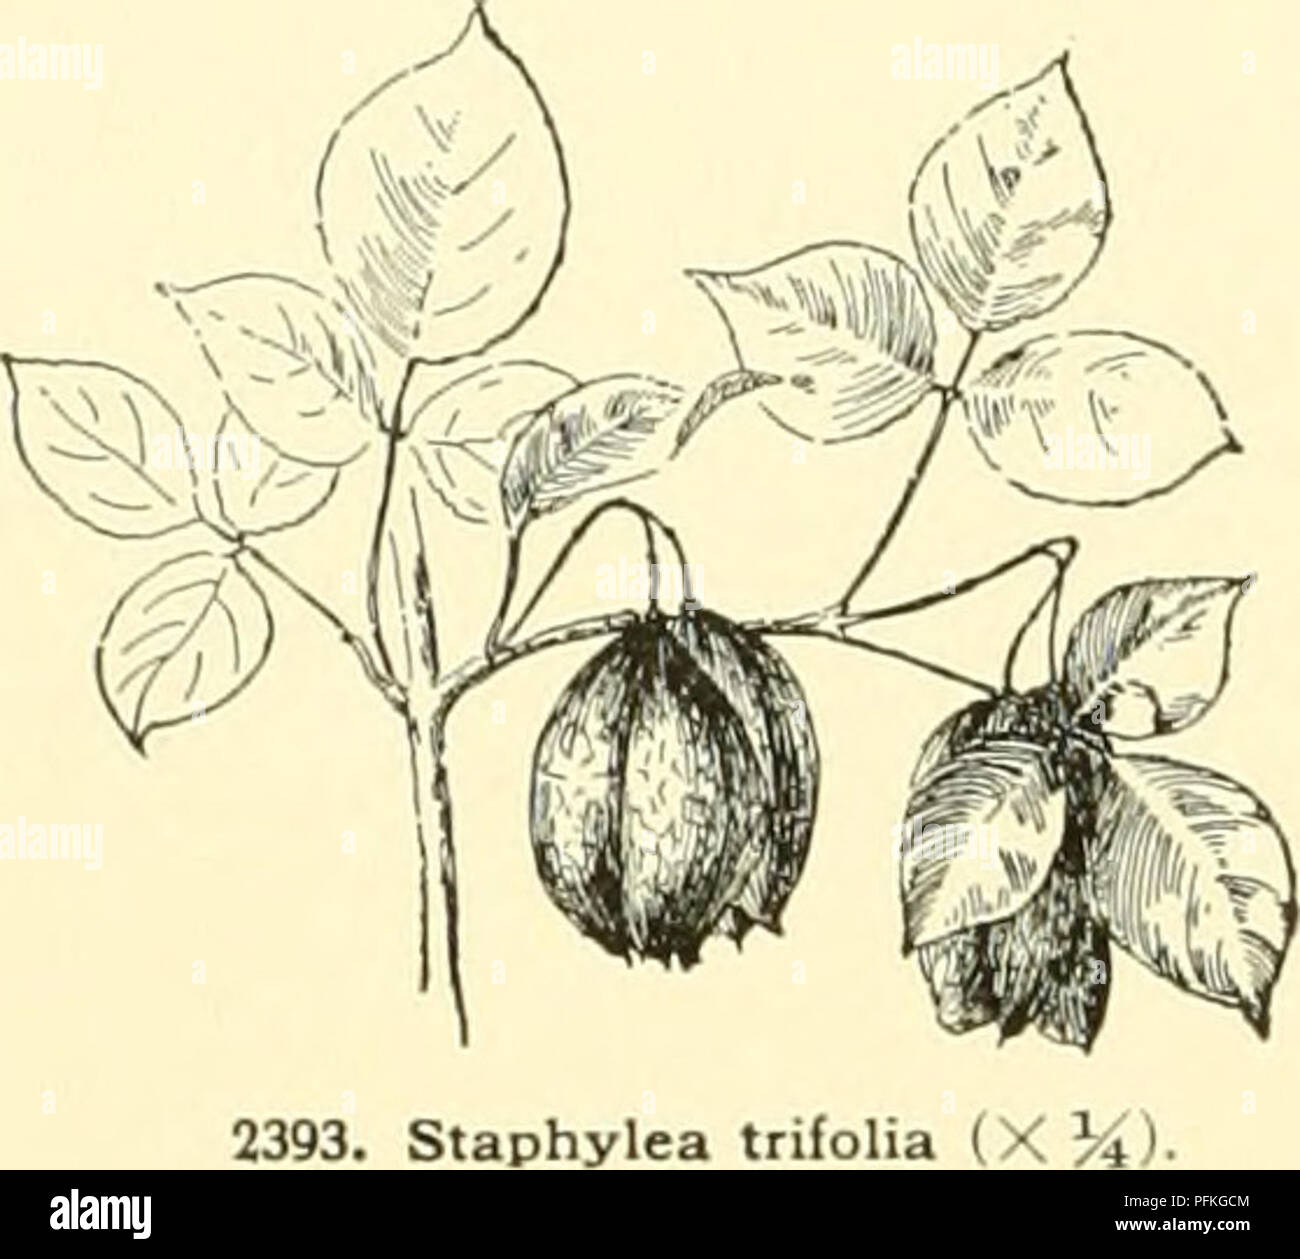 . Cyclopedia of American horticulture, comprising suggestions for cultivation of horticultural plants, descriptions of the species of fruits, vegetables, flowers and ornamental plants sold in the United States and Canada, together with geographical and biographical sketches, and a synopsis of the vegetable kingdom. Gardening -- Dictionaries; Plants -- North America encyclopedias. 1718 STAPHYLEA with 1 or few subglobose rather large, bony seeds in each cell. A. Lcs. 3-foliolate. B. Middle leaflet short-stalked: panicle sessile. Bumalda, DC. Shrub, 6 ft. high, with upright and spreading slender  Stock Photo